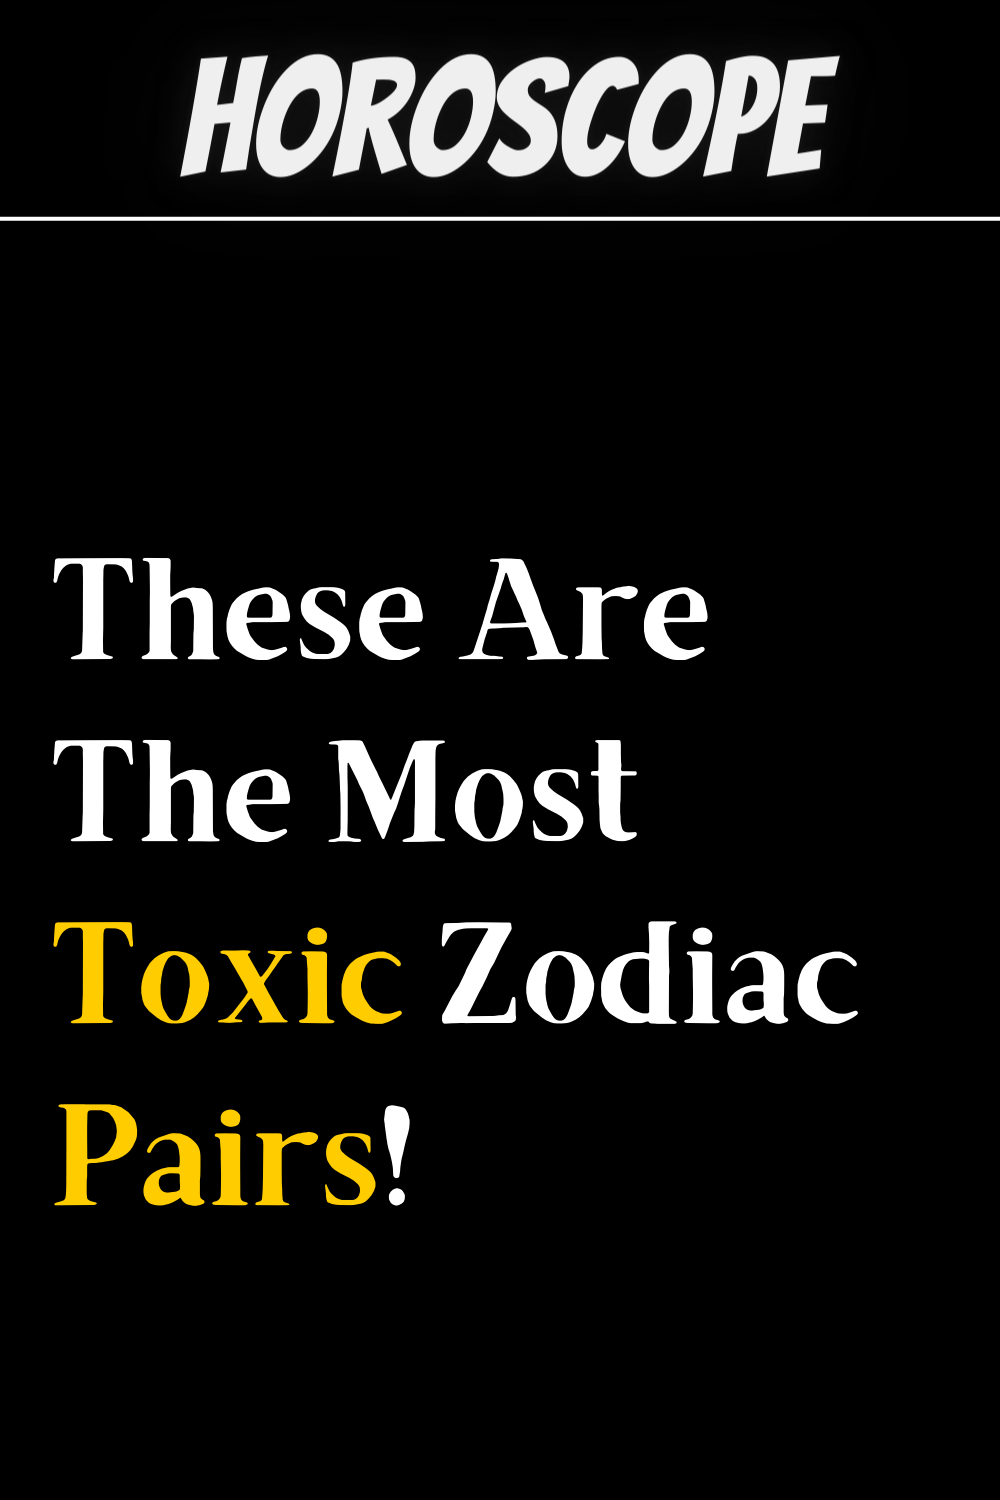 These Are The Most Toxic Zodiac Pairs!